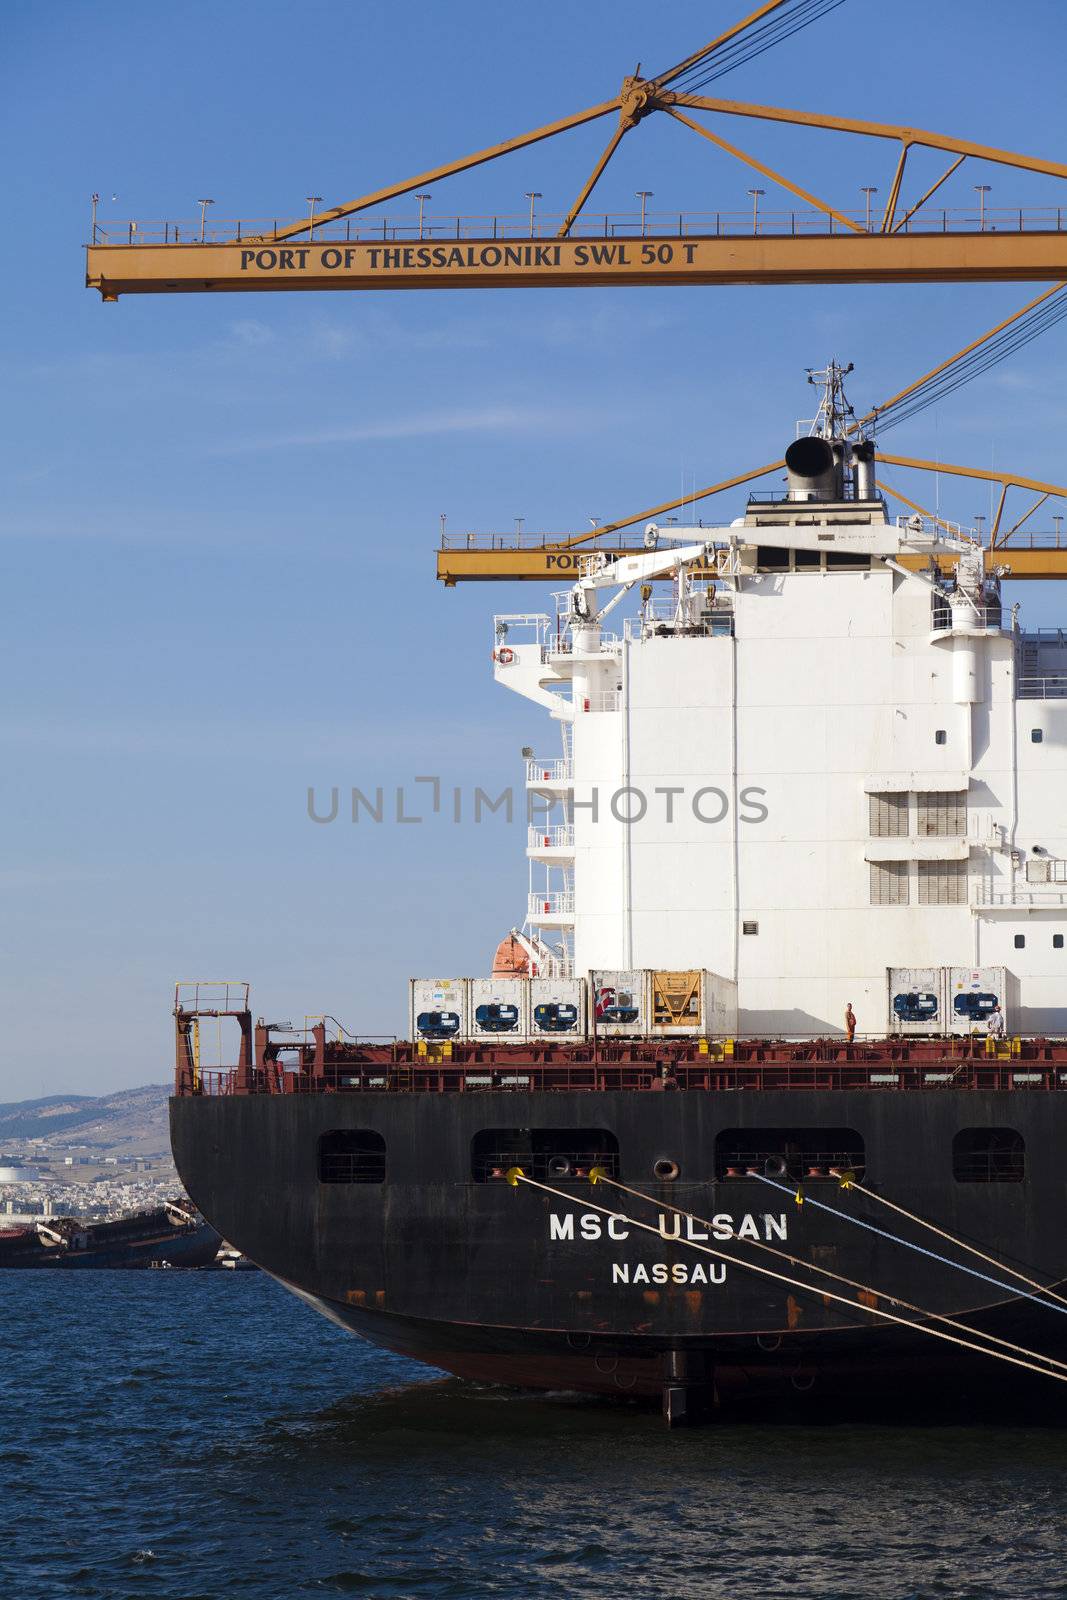 THESSALONIKI, GREECE - SEPTEMBER 29: Cranes load containers with products to ships in the port of Thessaloniki on September 29, 2011 in Thessaloniki, Greece